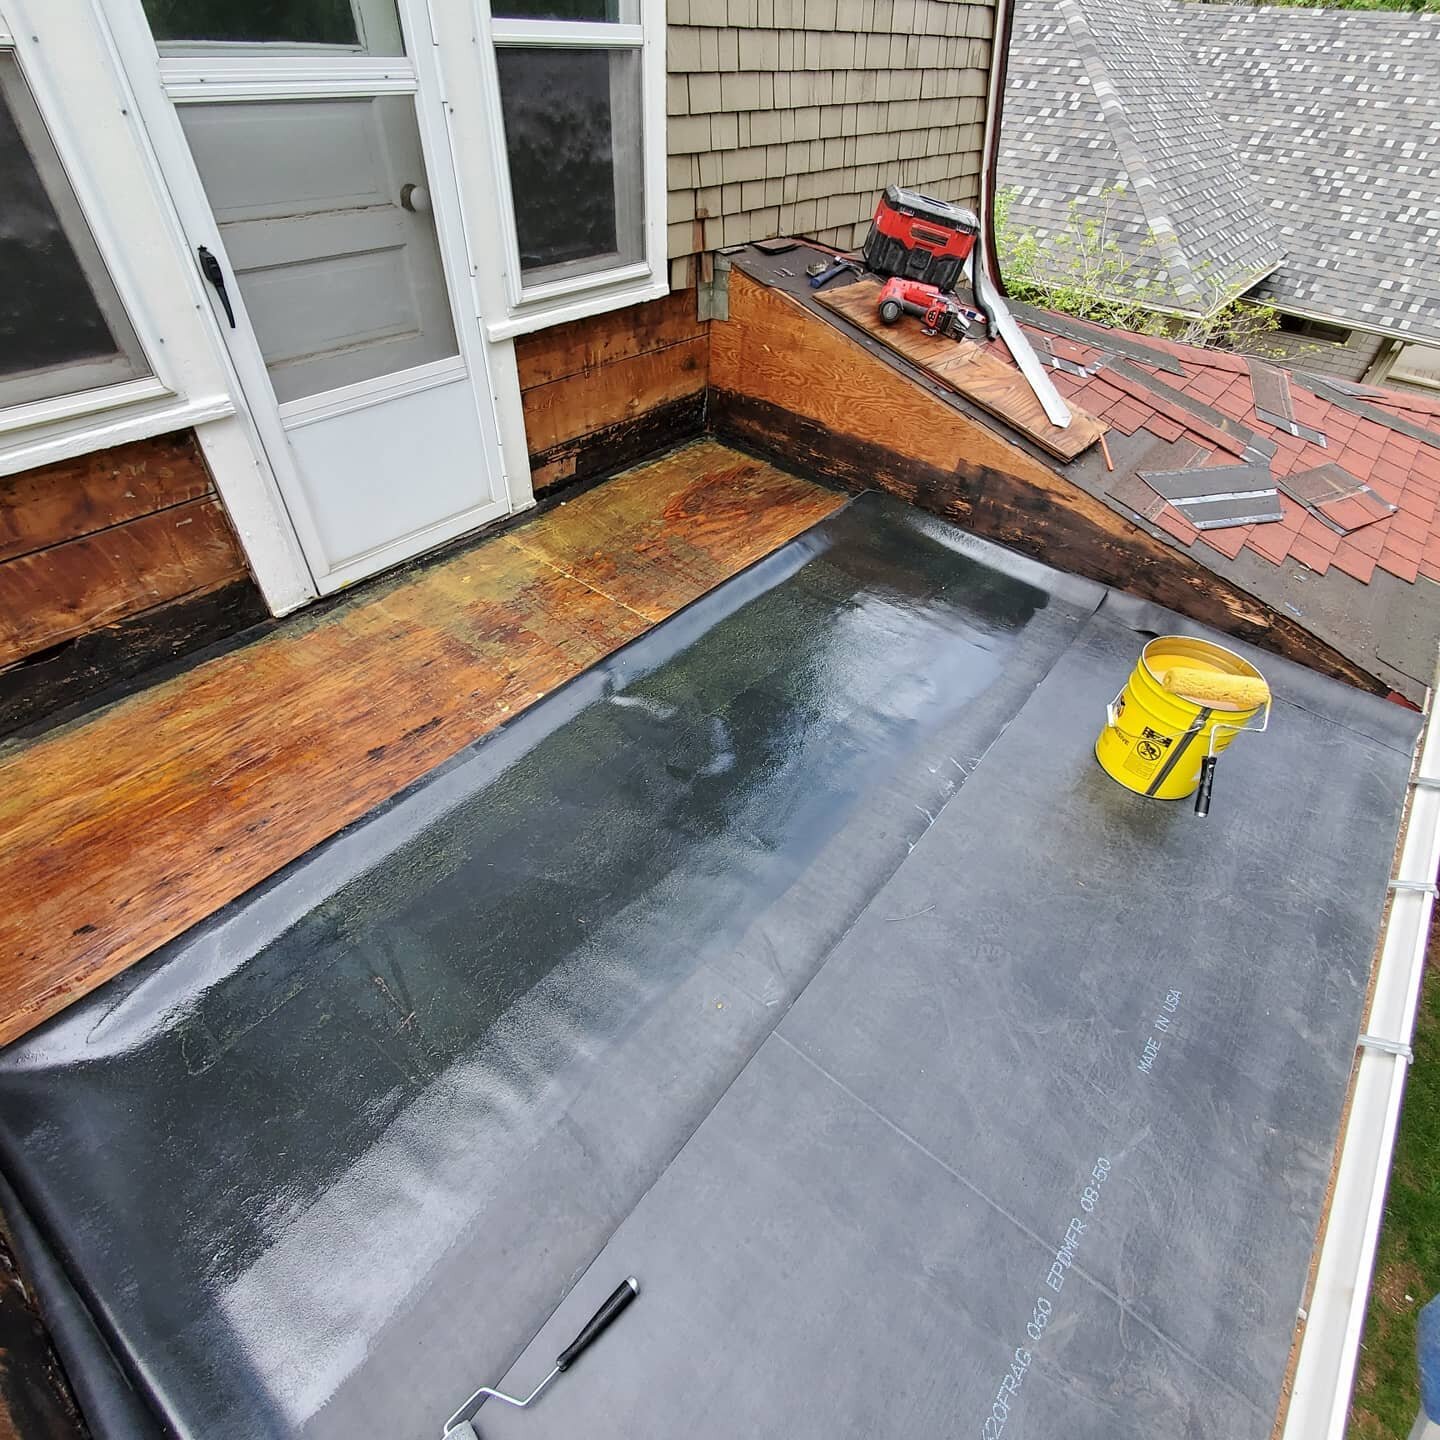 Rubber roof down, deck build starts tomorrow!